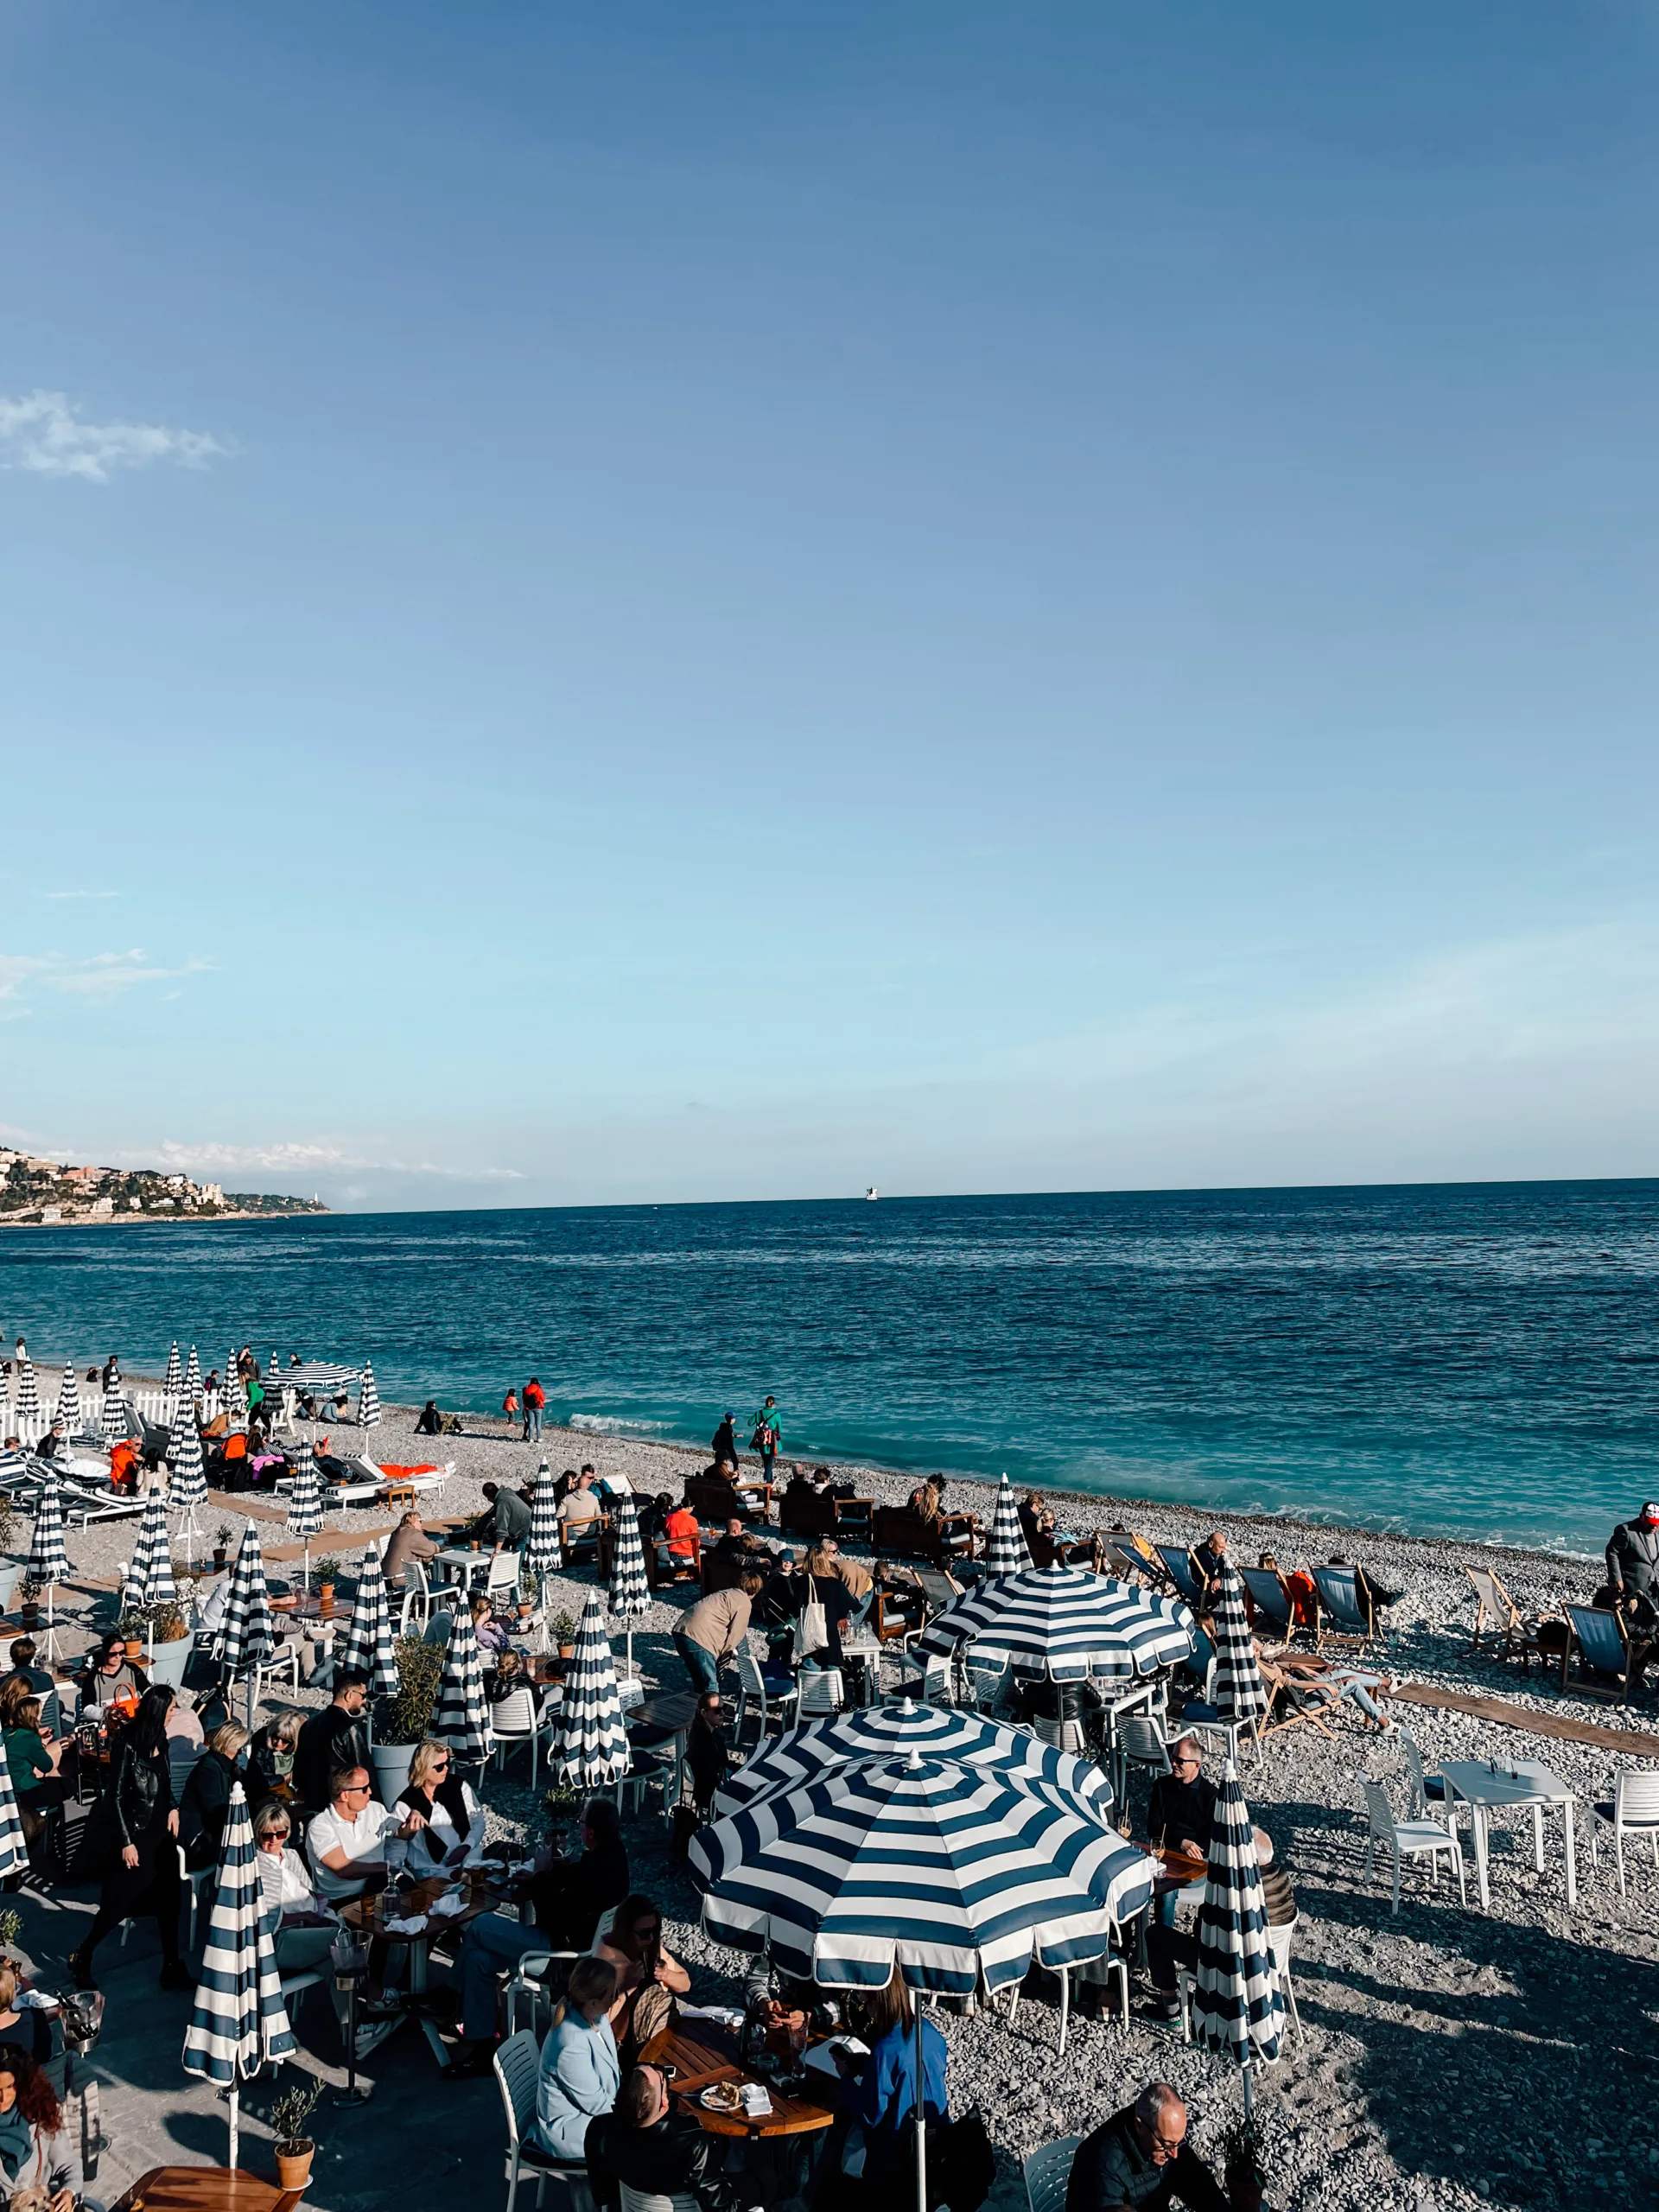 The beach in Nice covered with blue and white umbrellas and people enjoying a cloudless day 